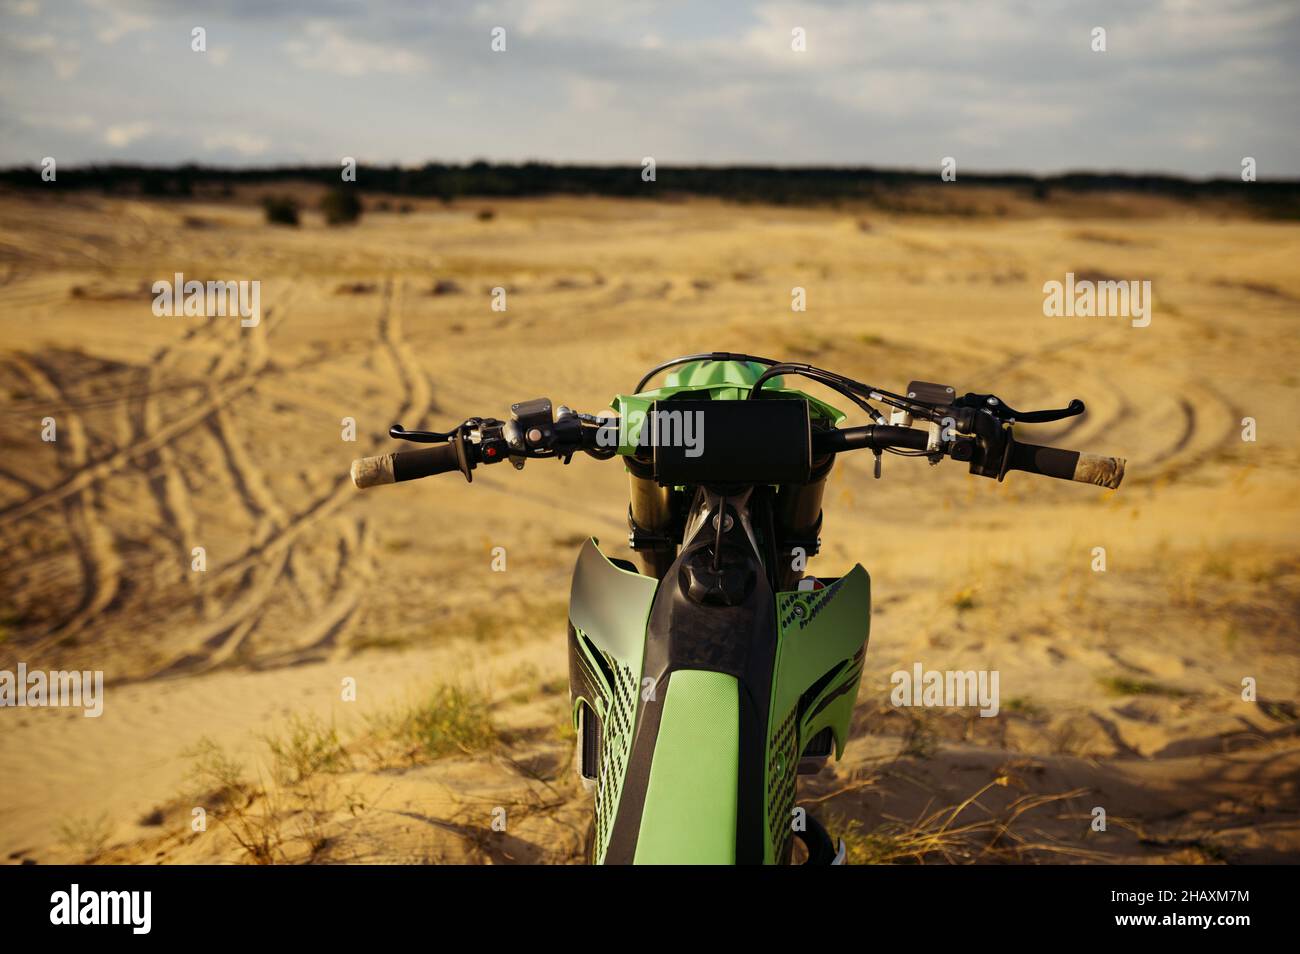 Motocross driver point of view on terrain Stock Photo